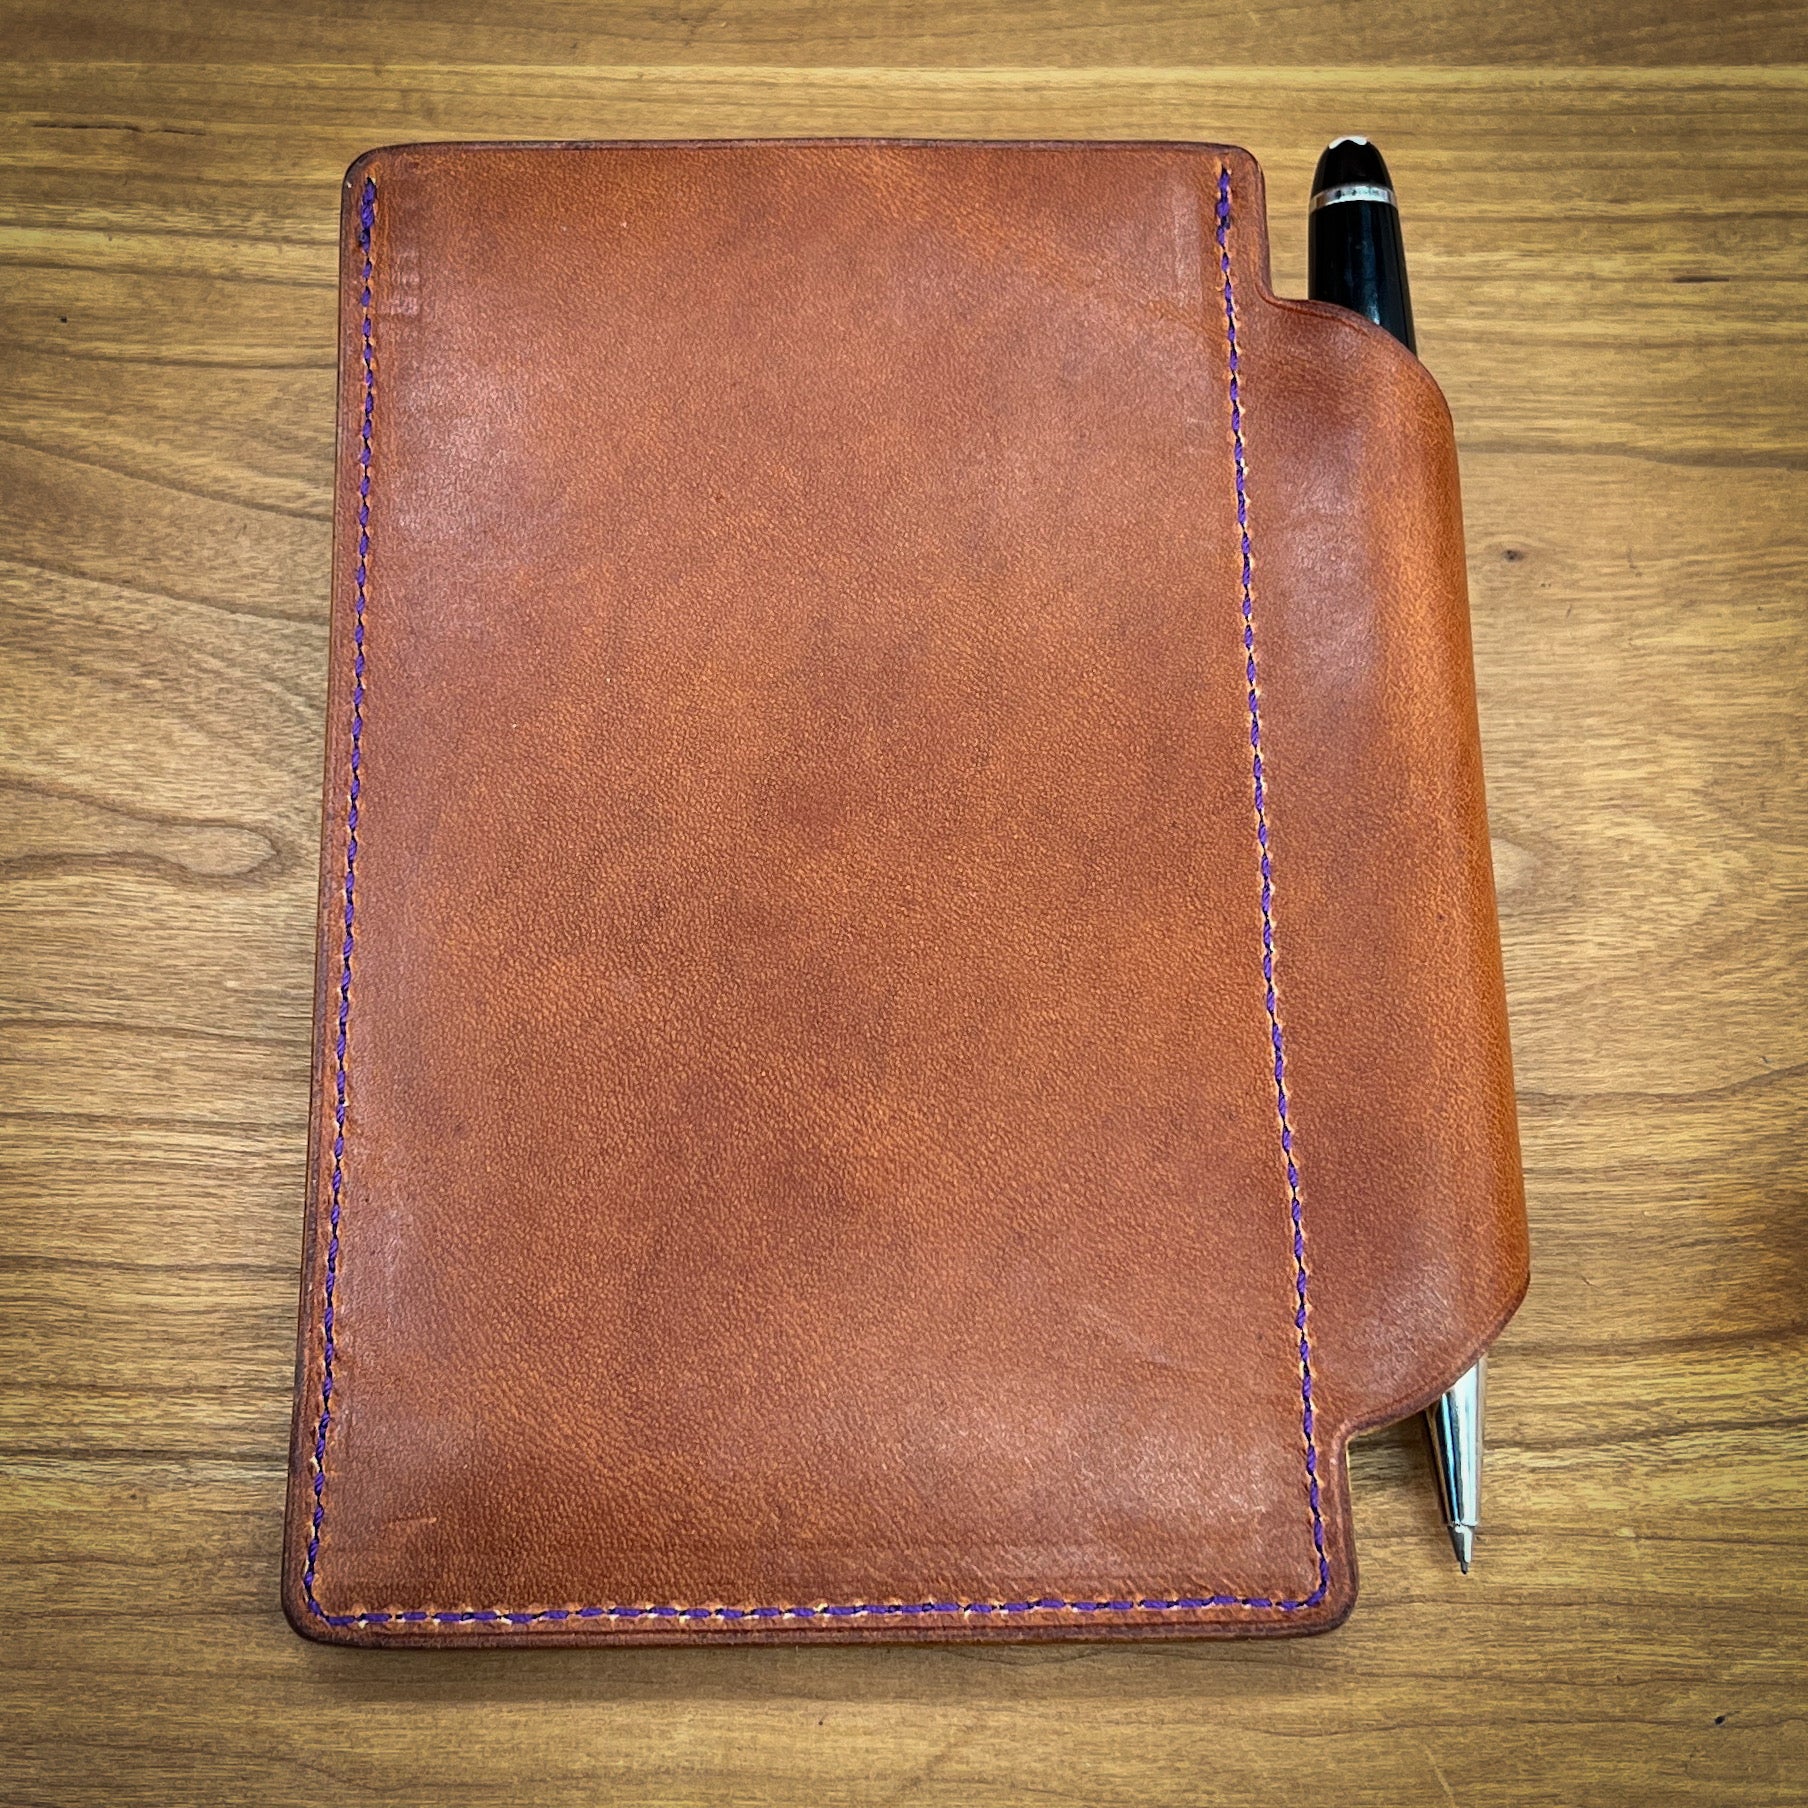 Personalized Pocket Jotter Index Card Notepad in Horween Leather – Custom  Leather and Pen